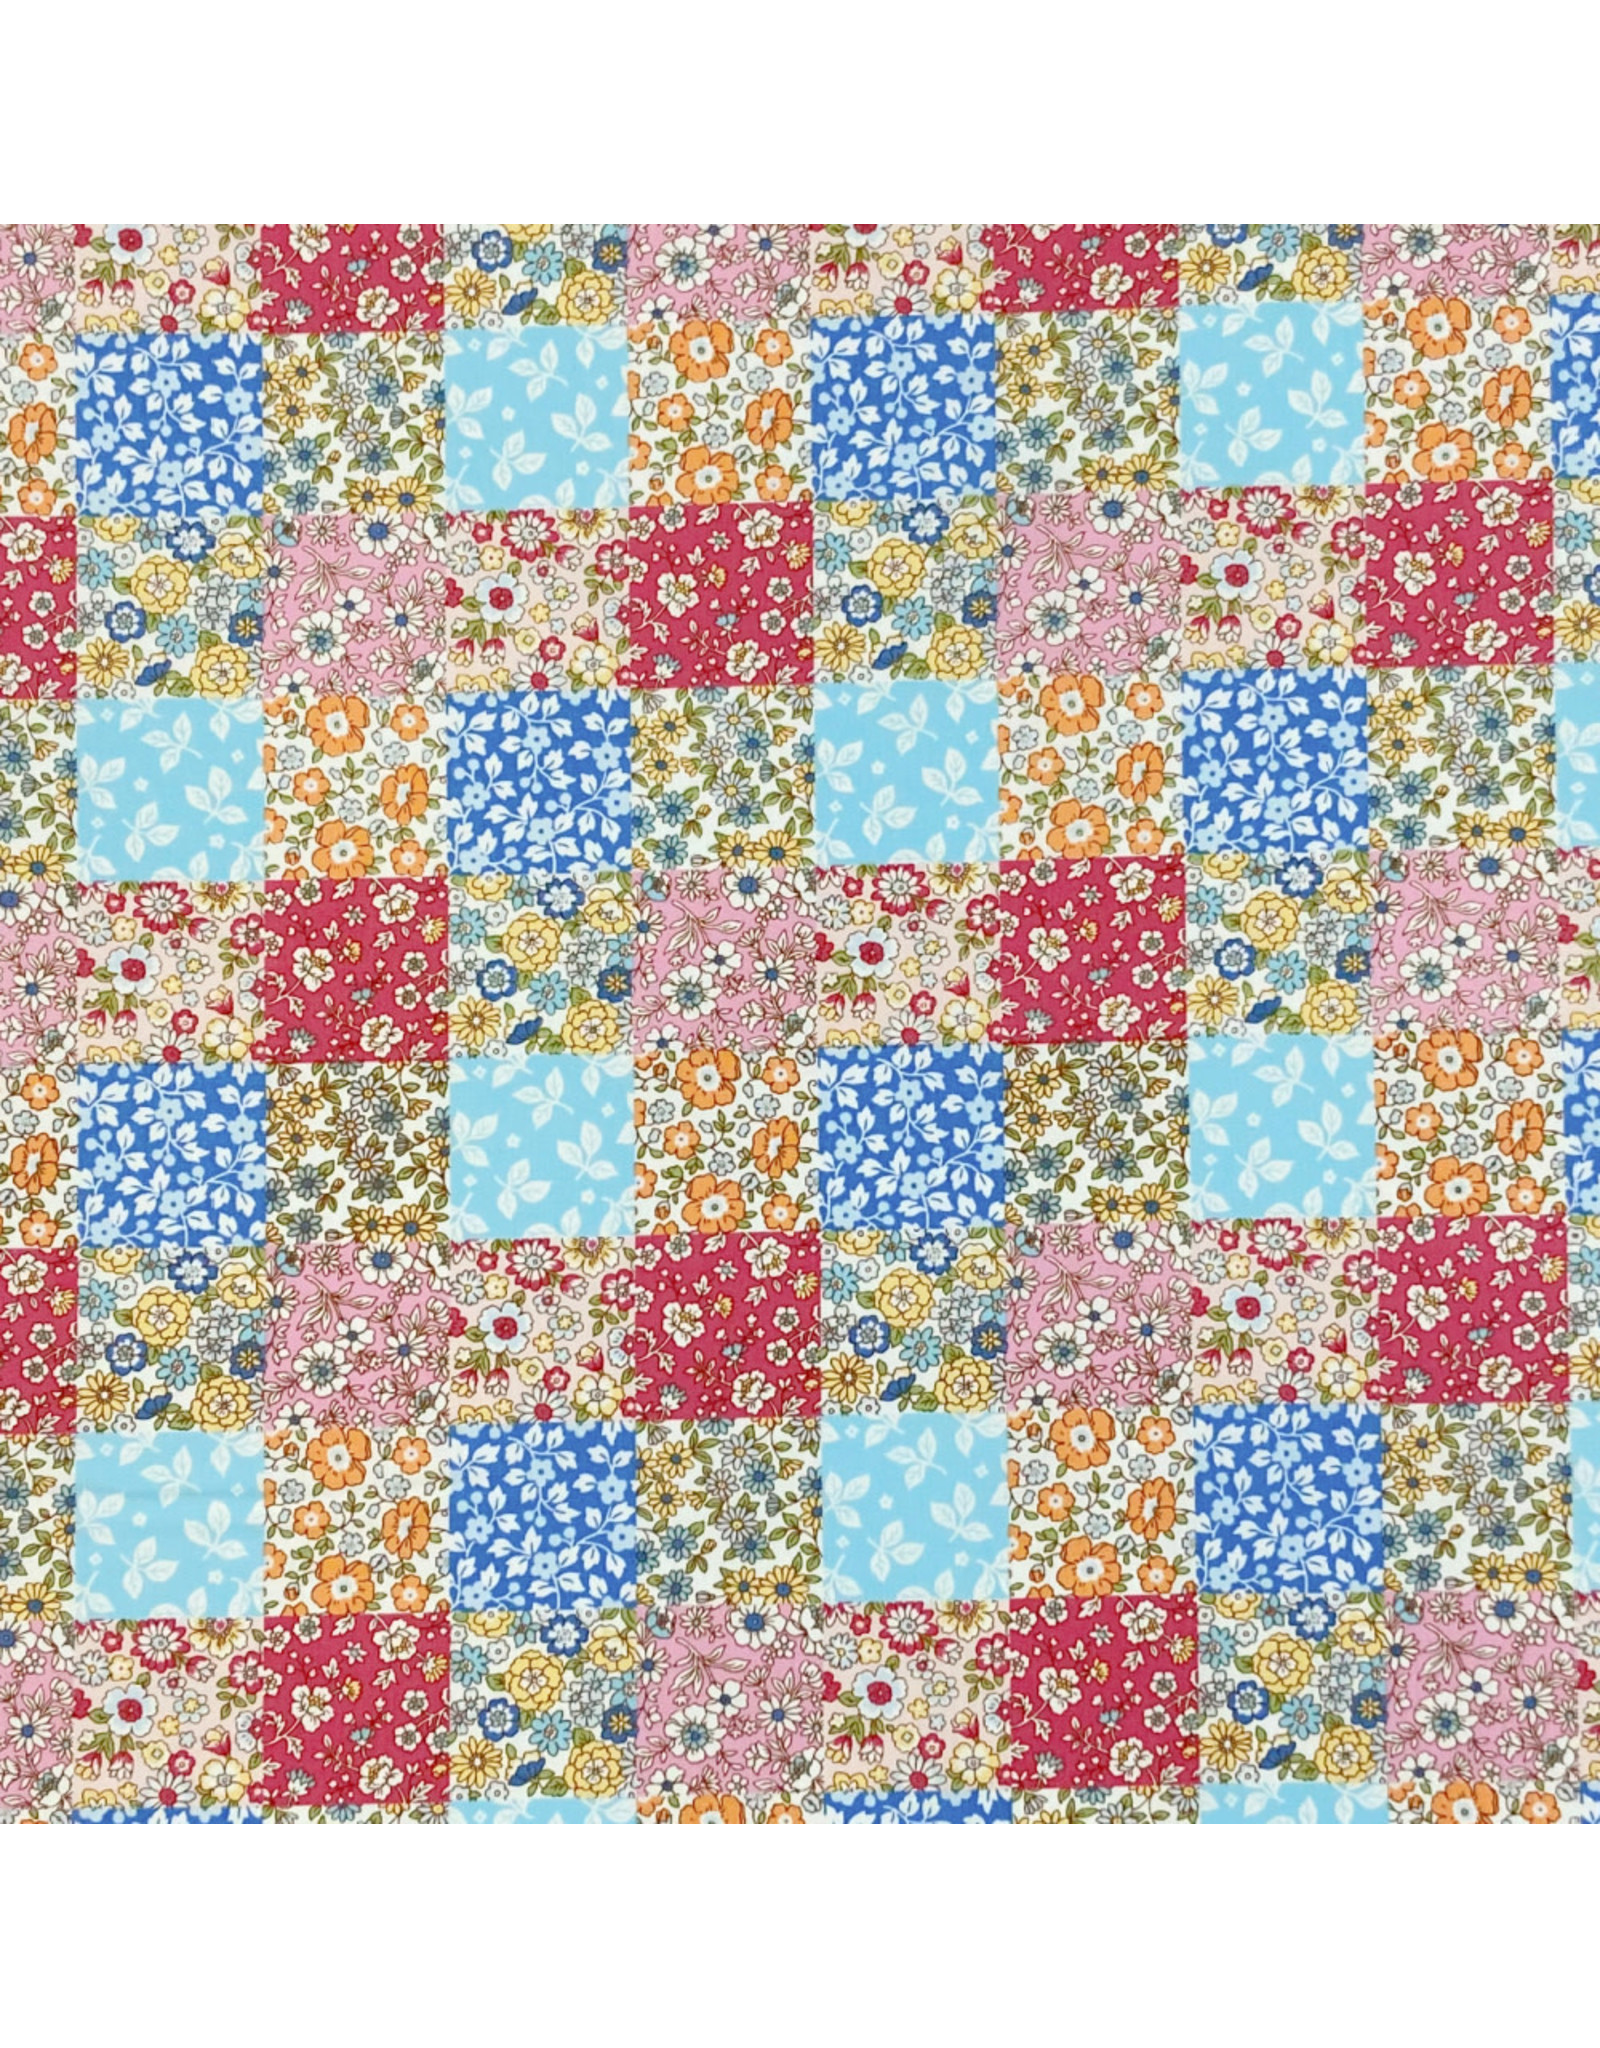 Cosmo, Japan Cosmo Japan, Floral Patchwork in Pink, Fabric Half-Yards